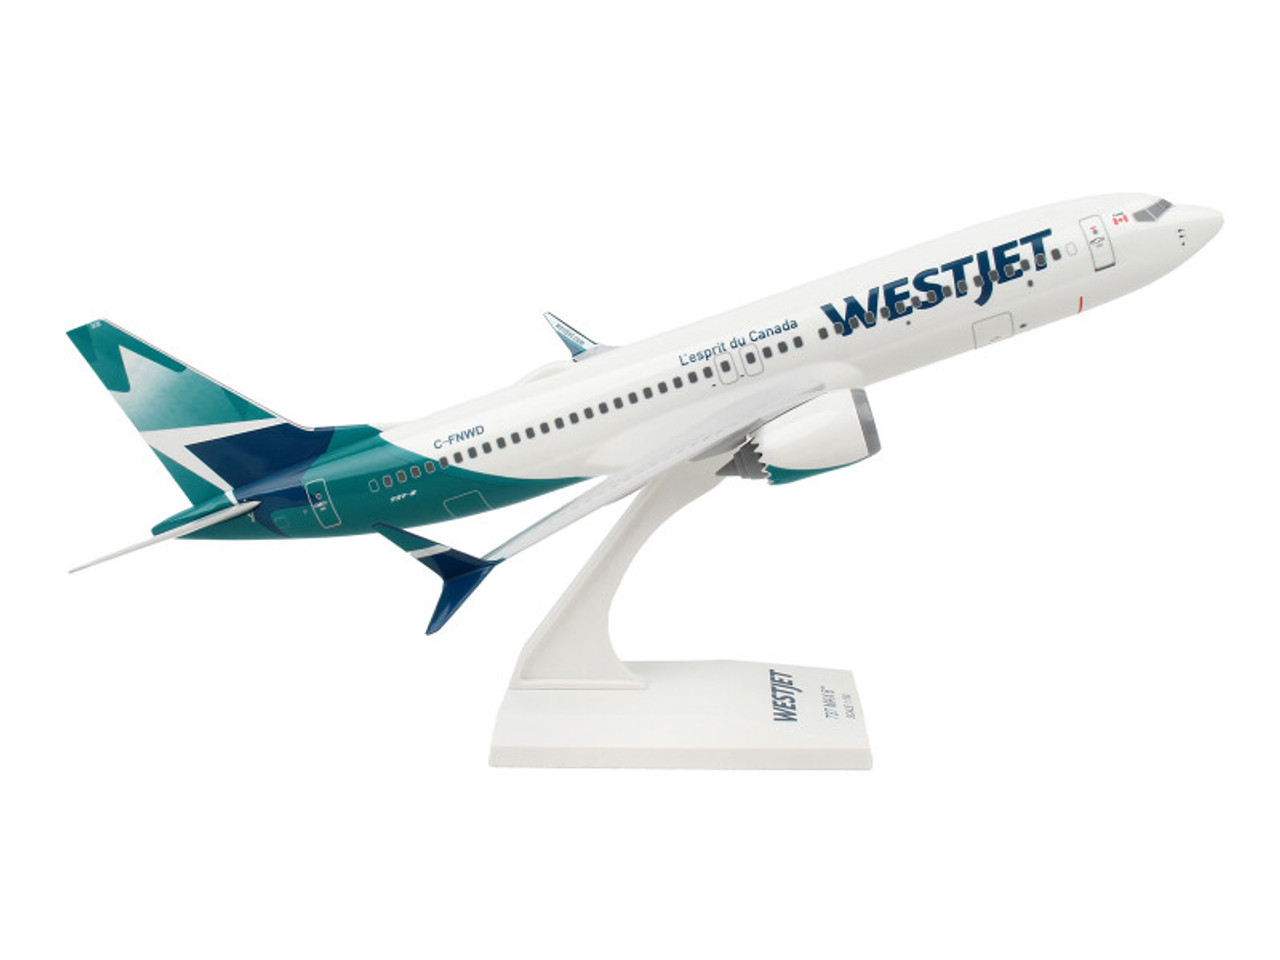 Boeing 737 MAX 8 Commercial Aircraft "WestJet Airlines" (C-FNWD) White with Teal Tail (Snap-Fit) 1/130 Plastic Model by Skymarks